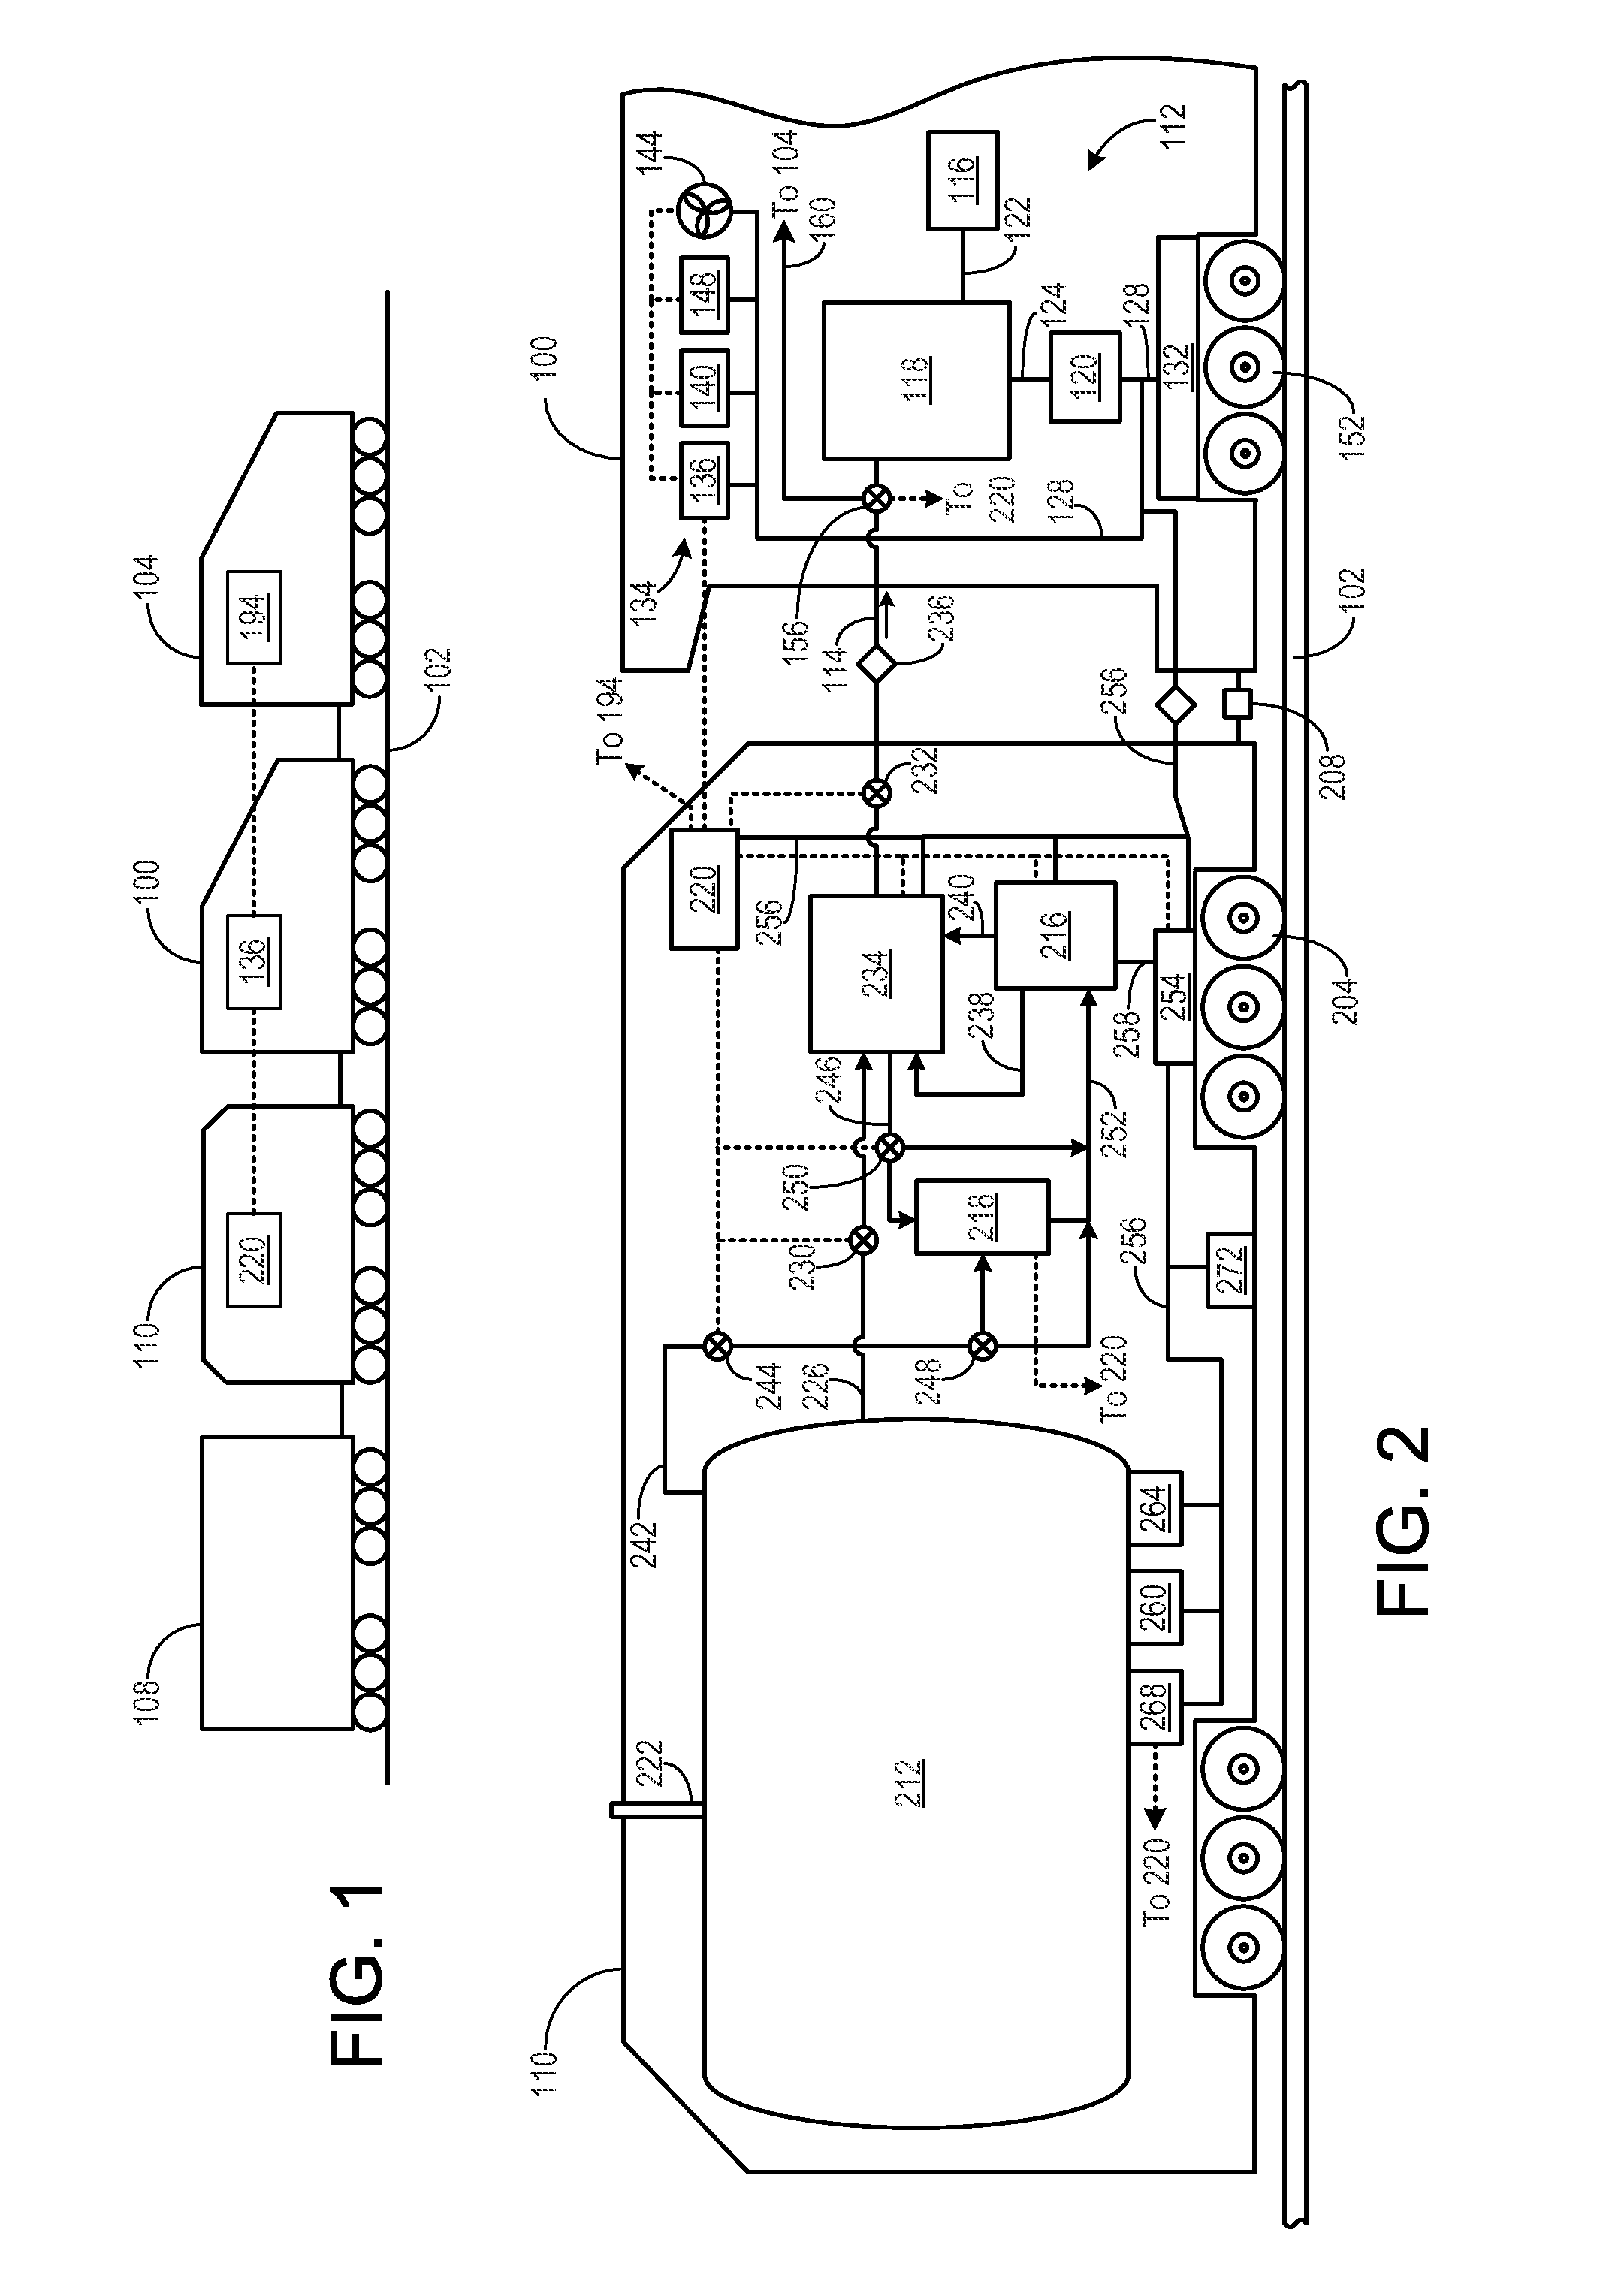 Methods and systems for a rail vehicle including a source of gaseous natural gas